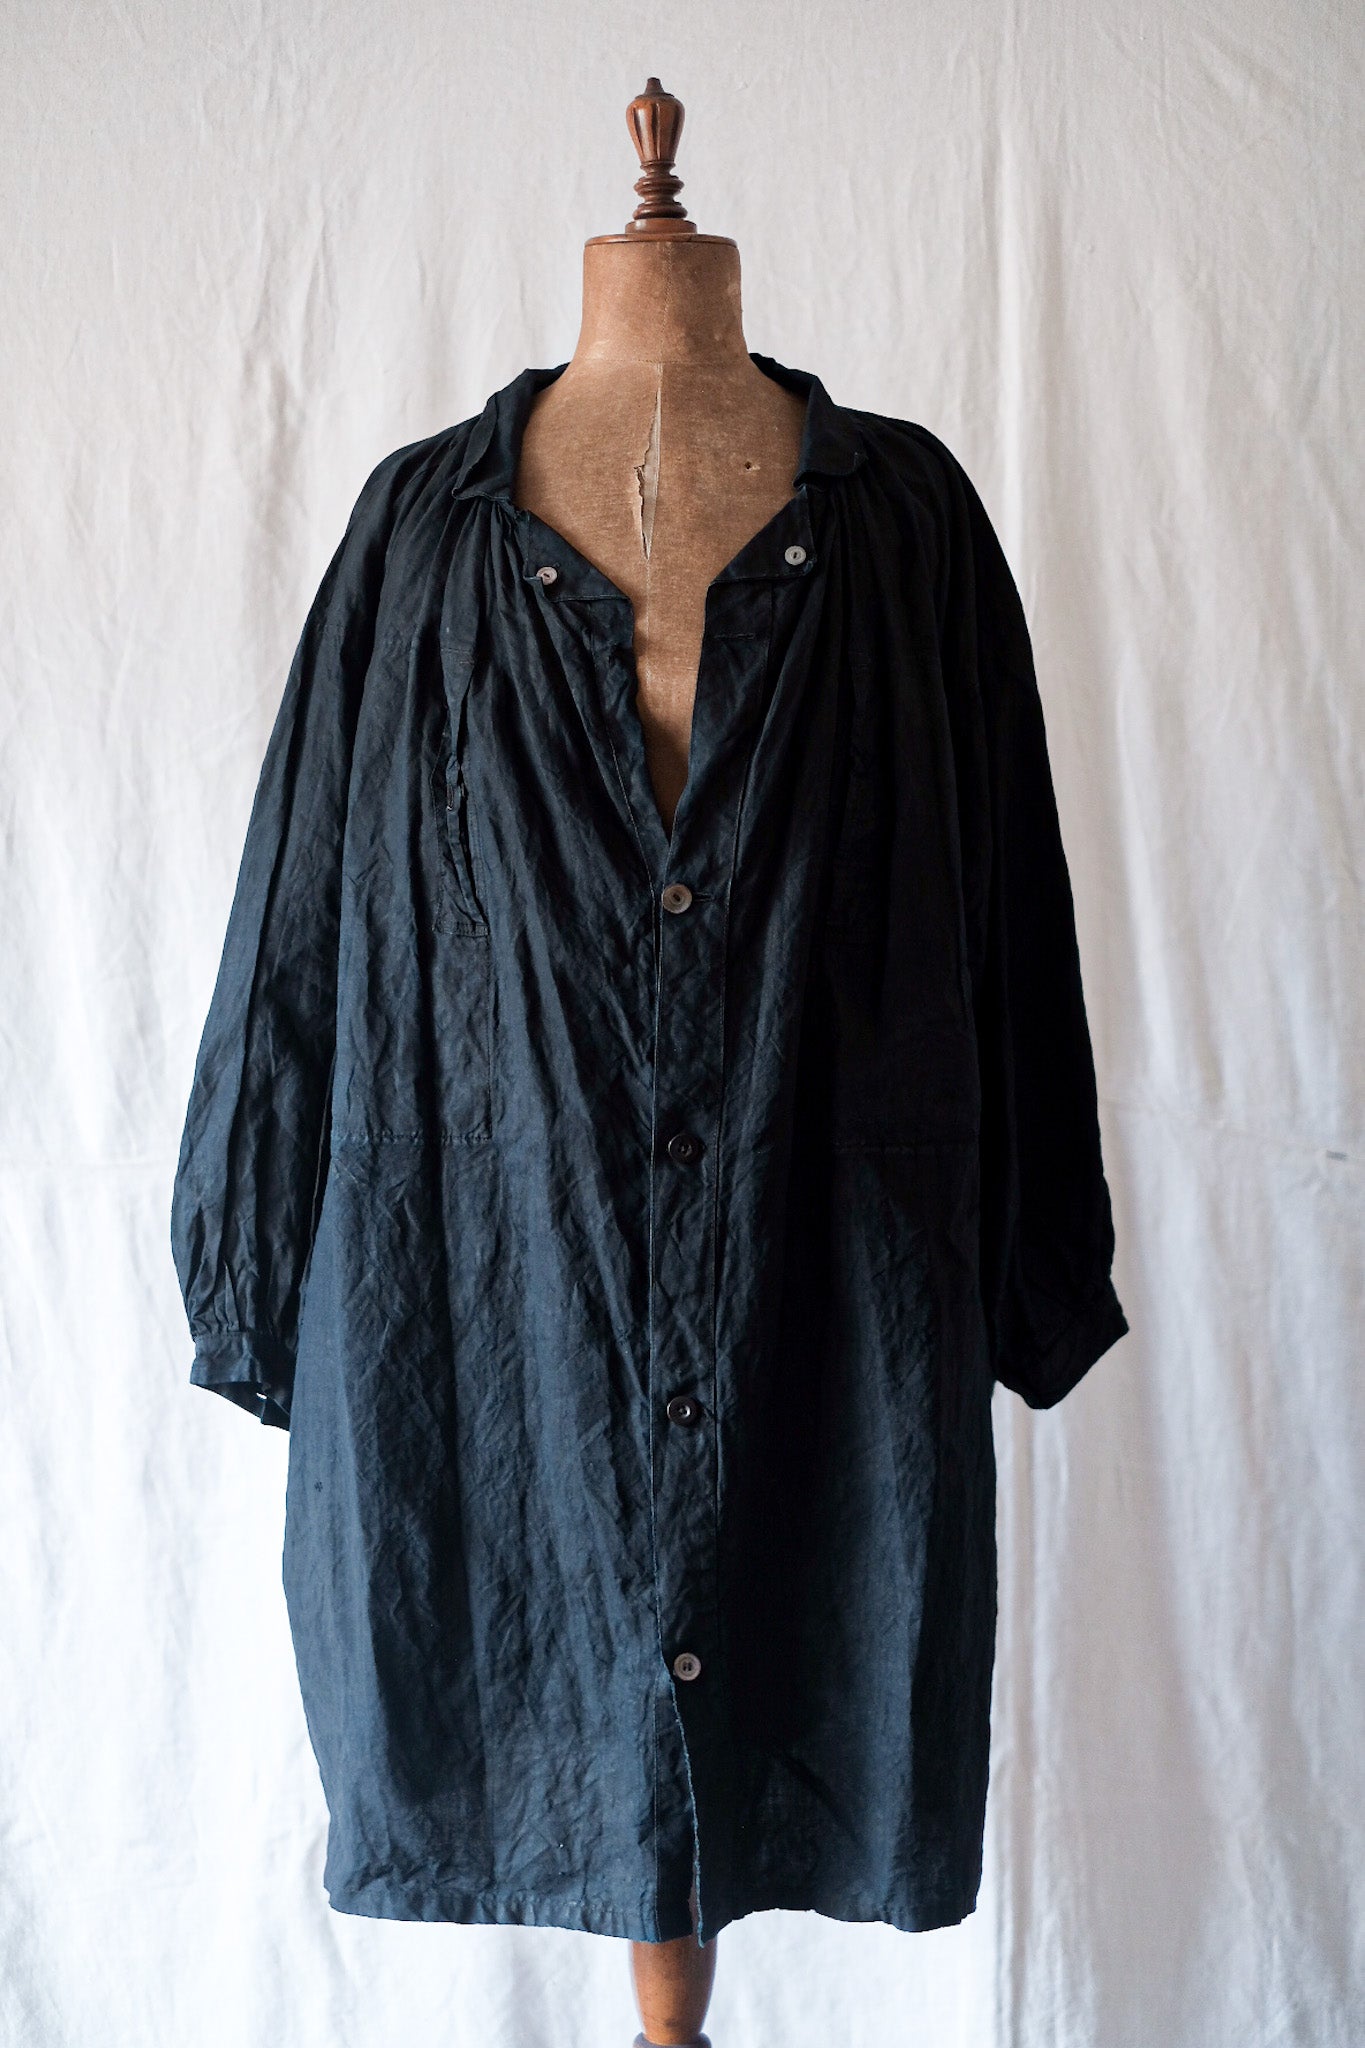 [Early 20th C] French Antique Indigo Linen Smock Open Type "Biaude"